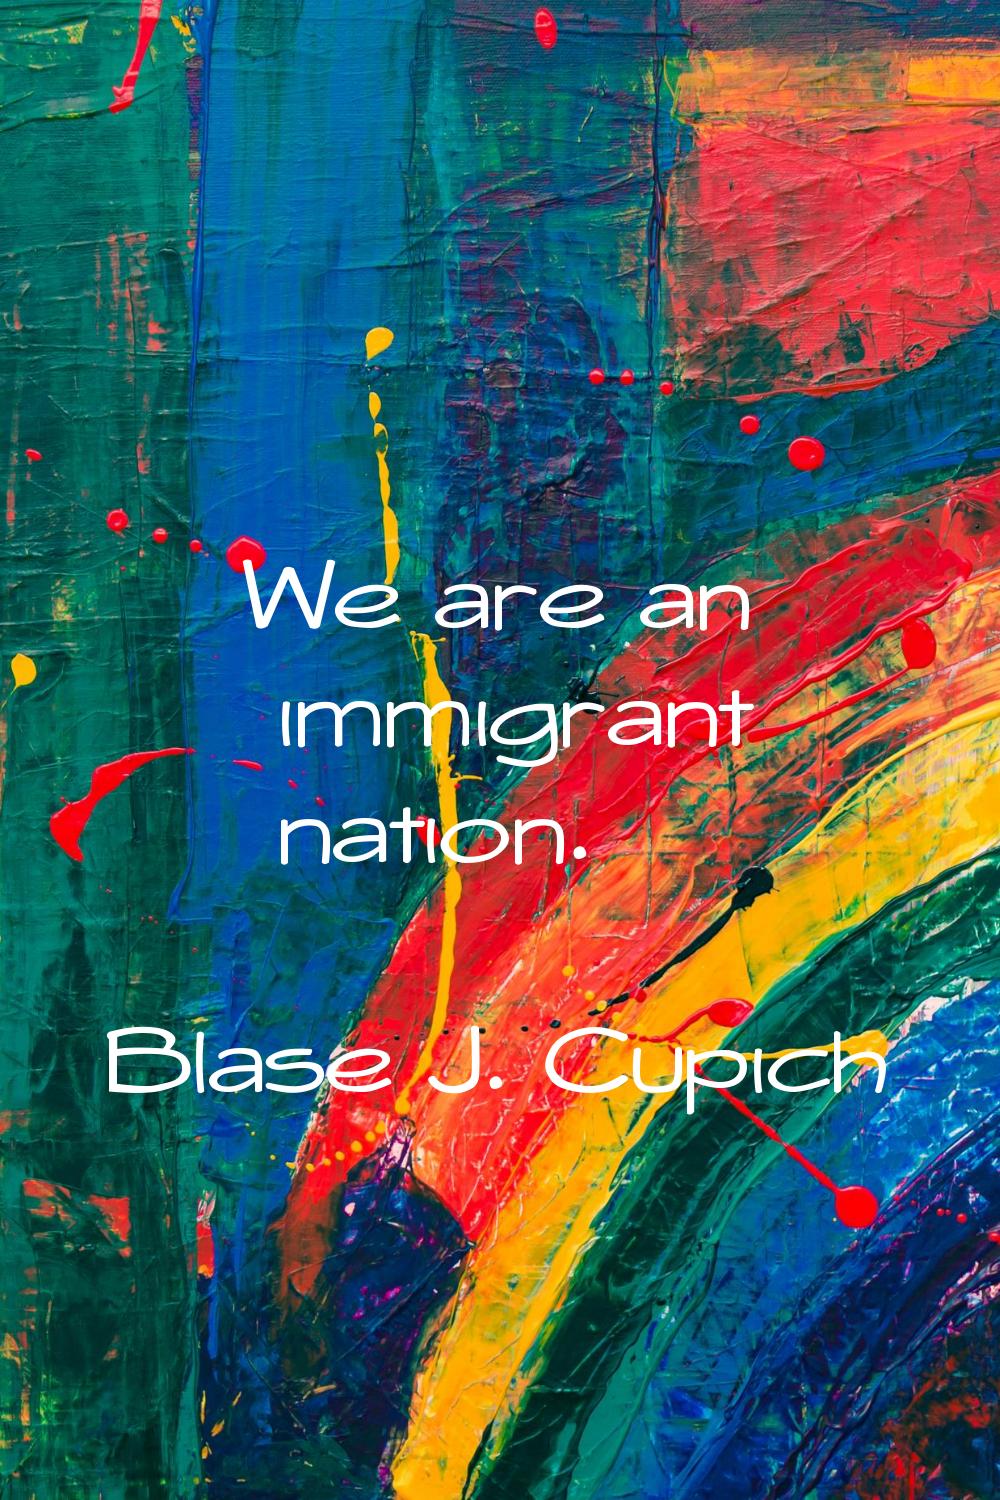 We are an immigrant nation.